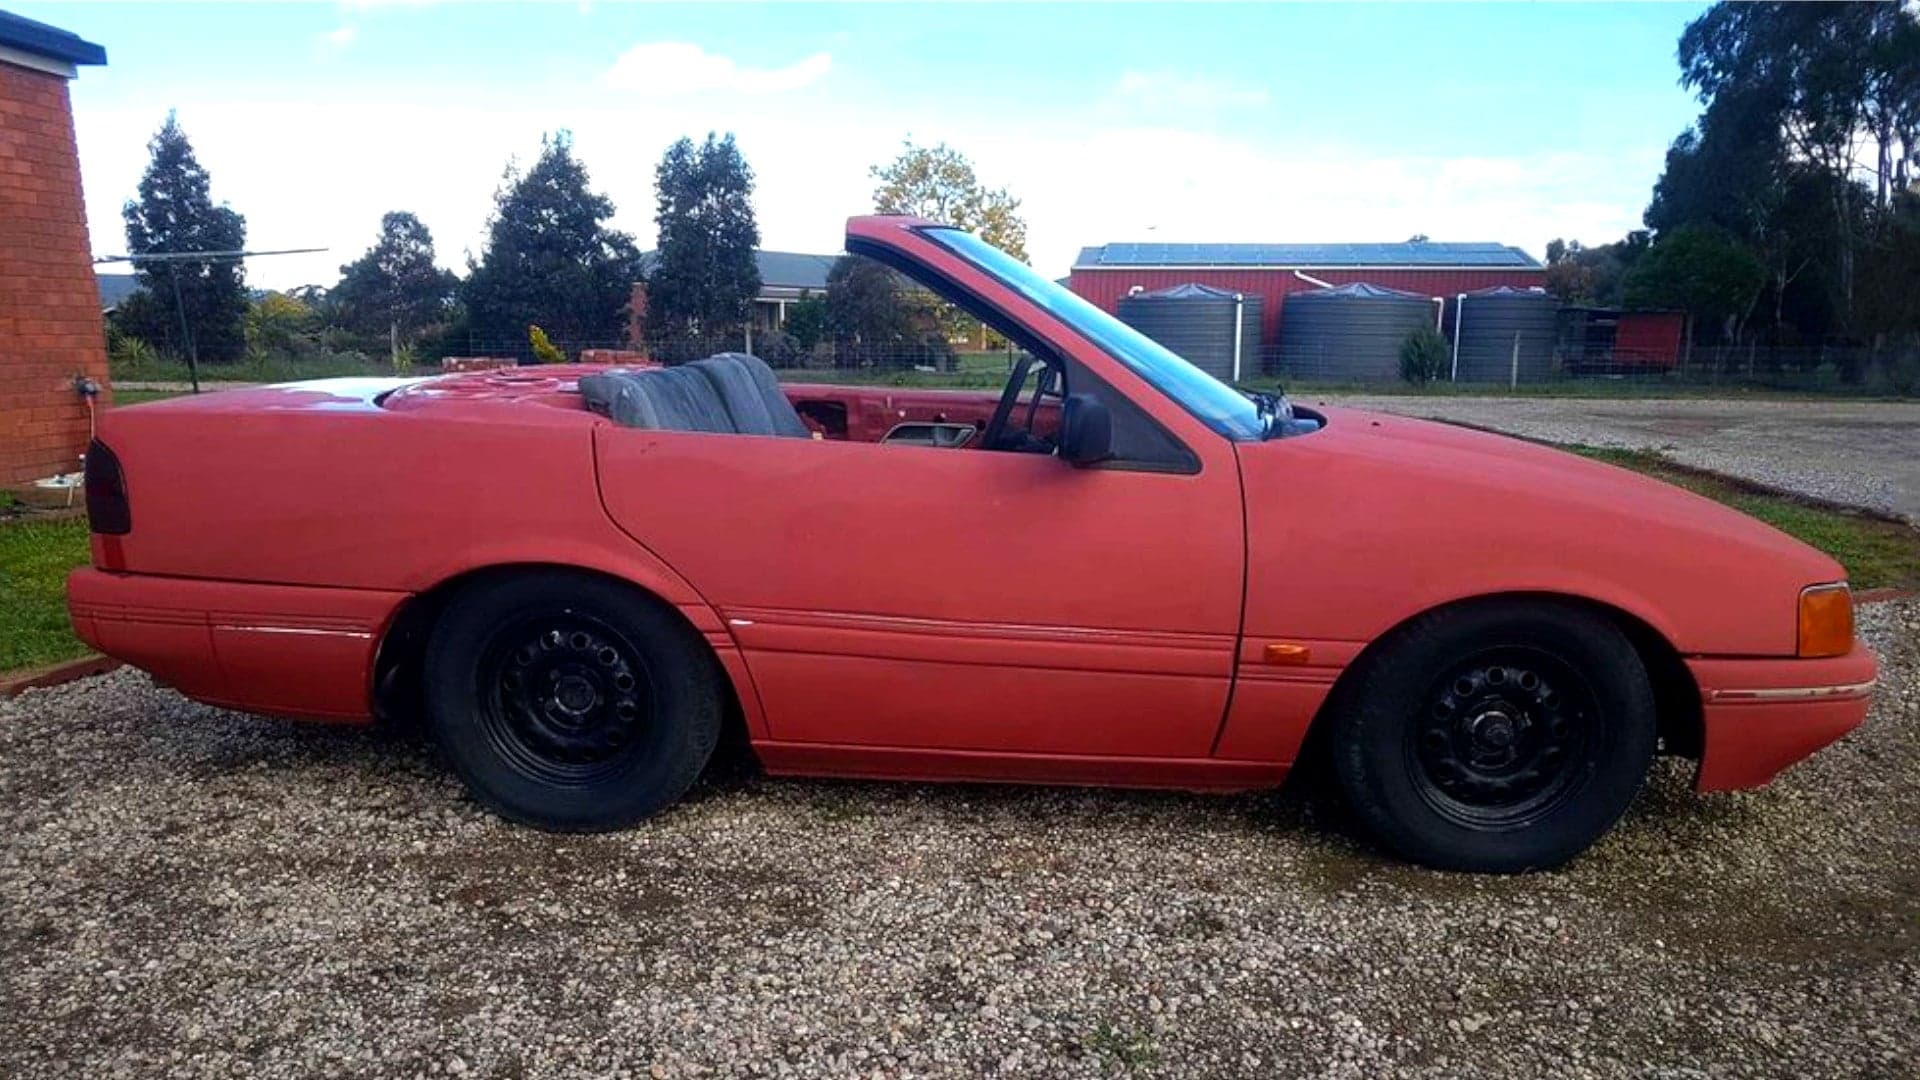 Ford Falcon Chopped up Into Scary Roofless Coupe